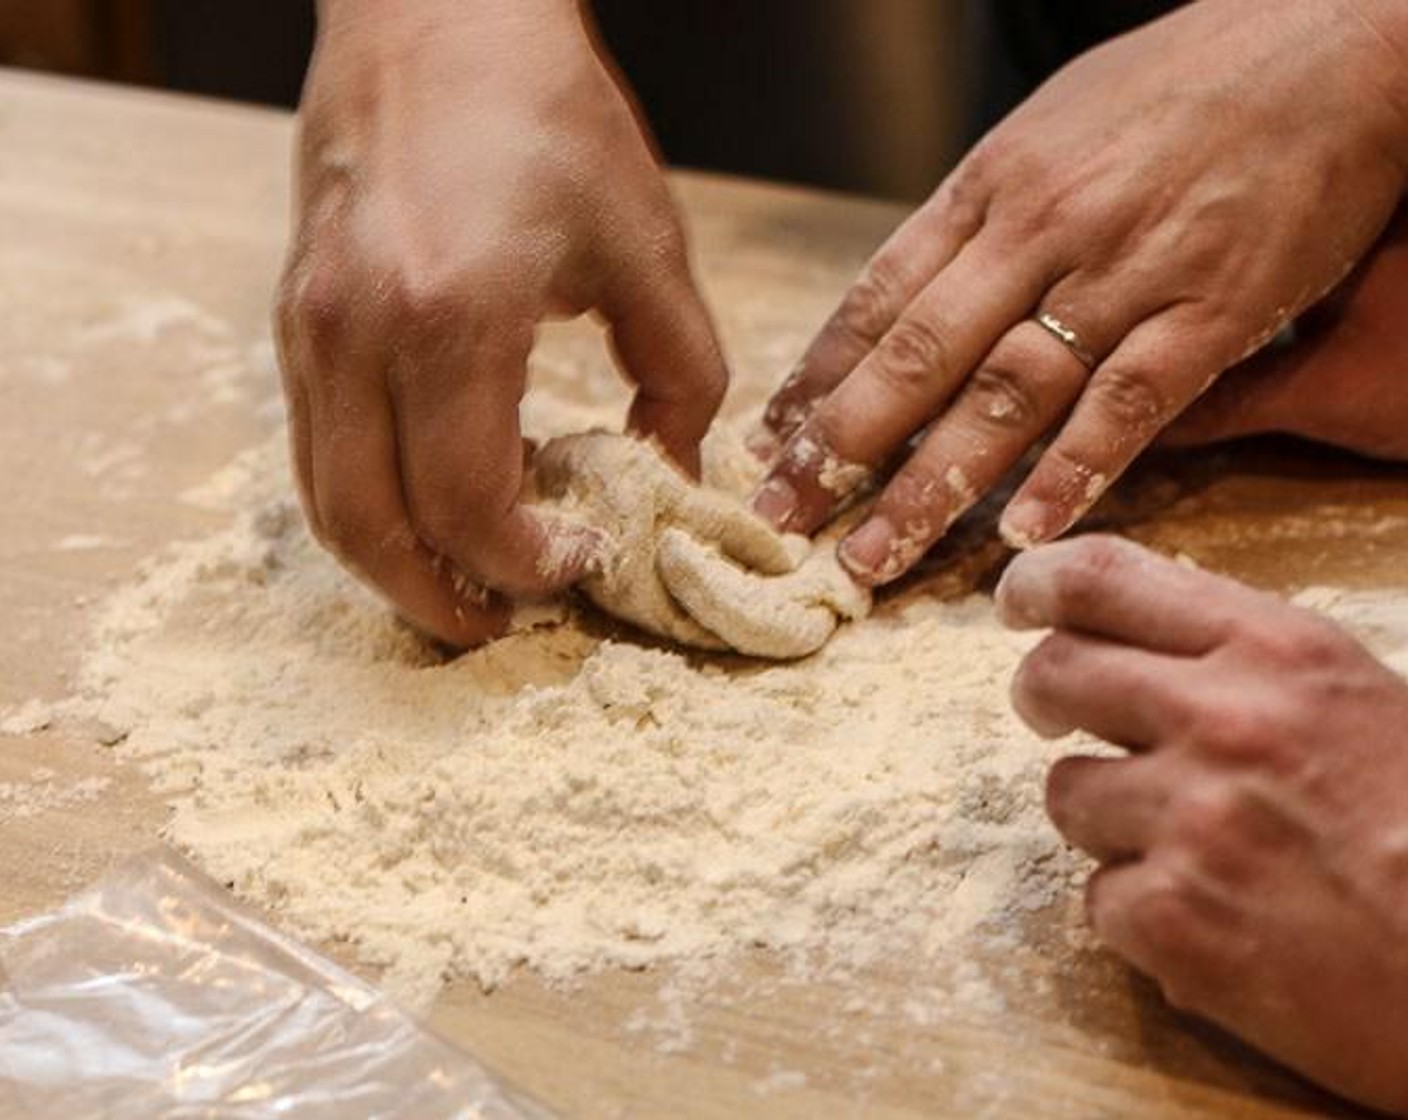 step 3 As the dough begins to mix and form, fold the dough over toward you, then push it with the heel of your hand away from you. Repeat this 10-12 times until the dough starts to get firm. Continue until all flour is incorporated into the egg and dough is completely formed.